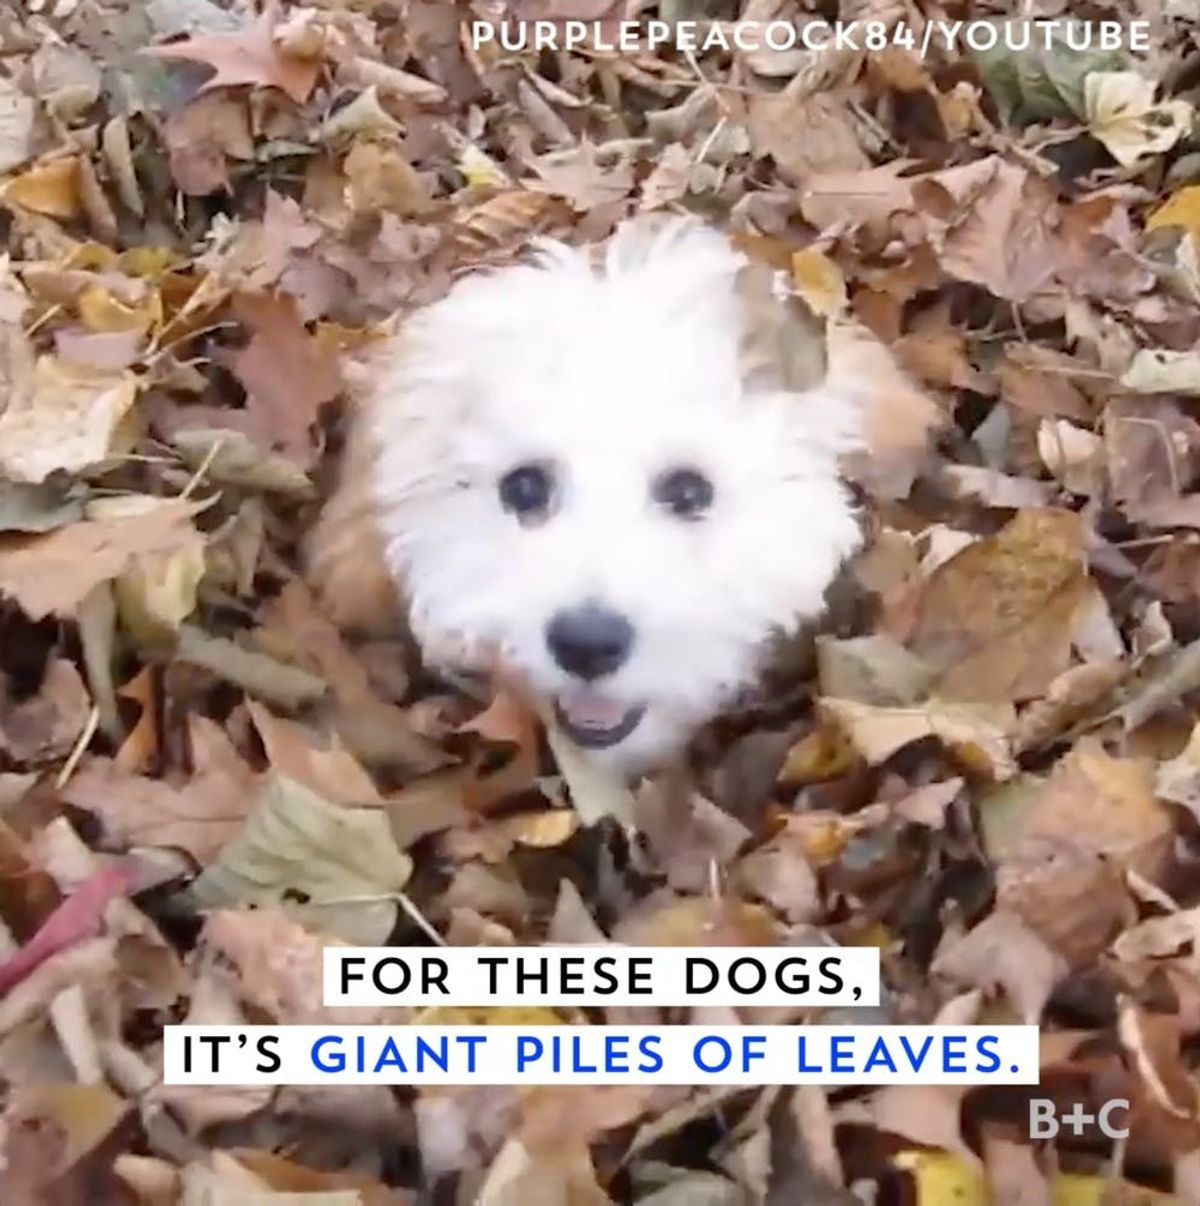 These Dogs Love Giant Piles of Leaves